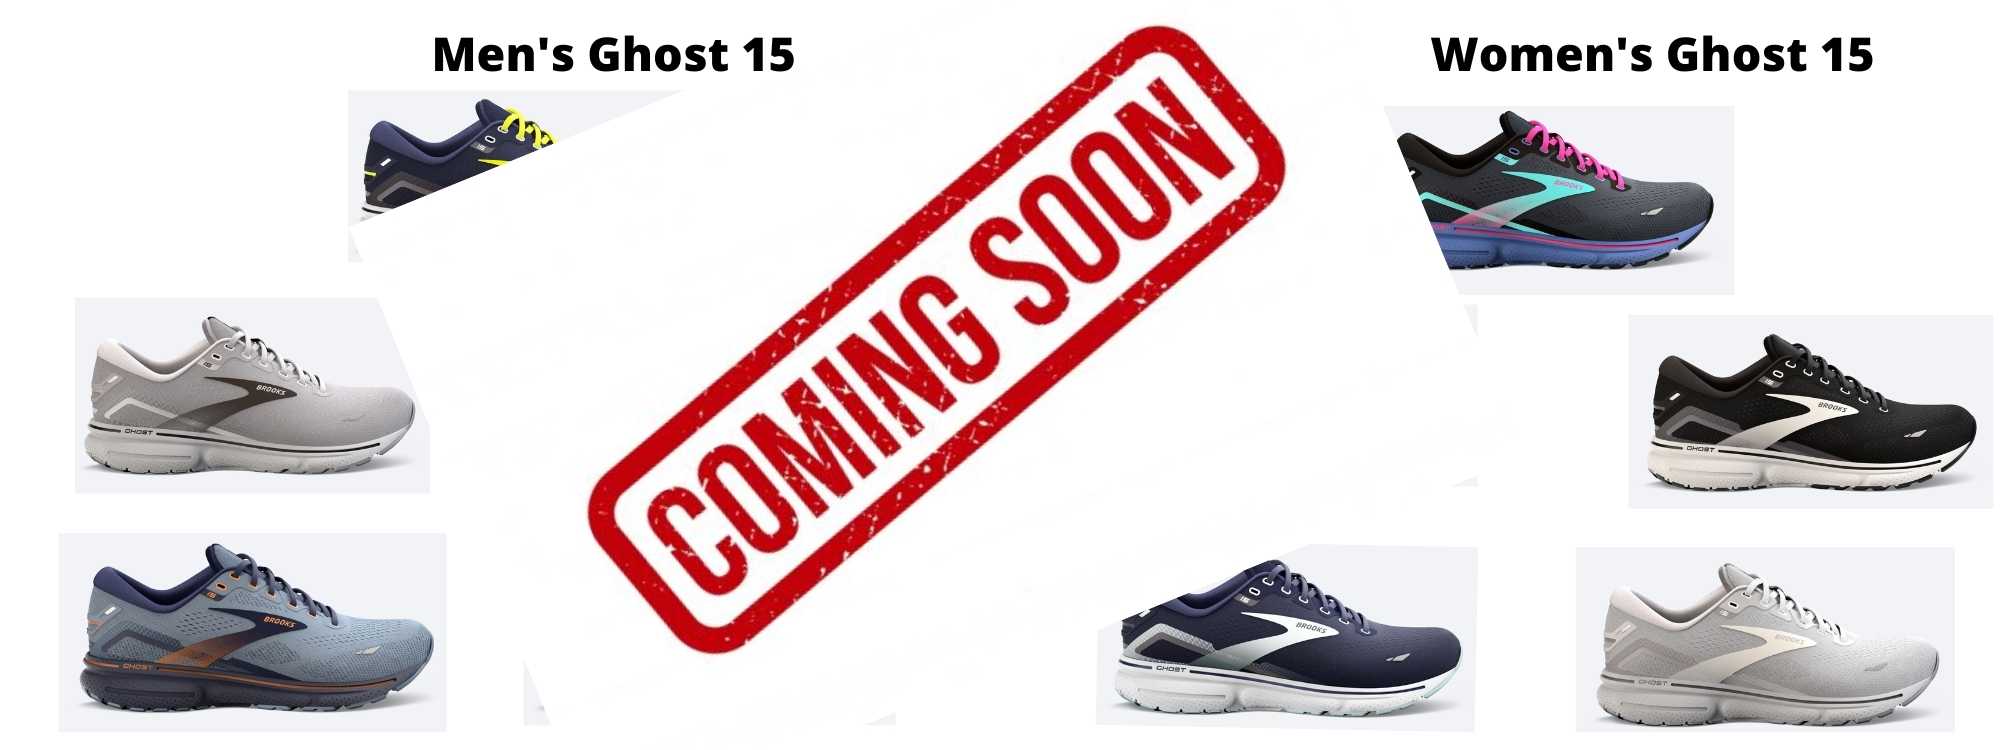 Brooks Ghost 15 can be purchased at The Running Well Store in Kansas City